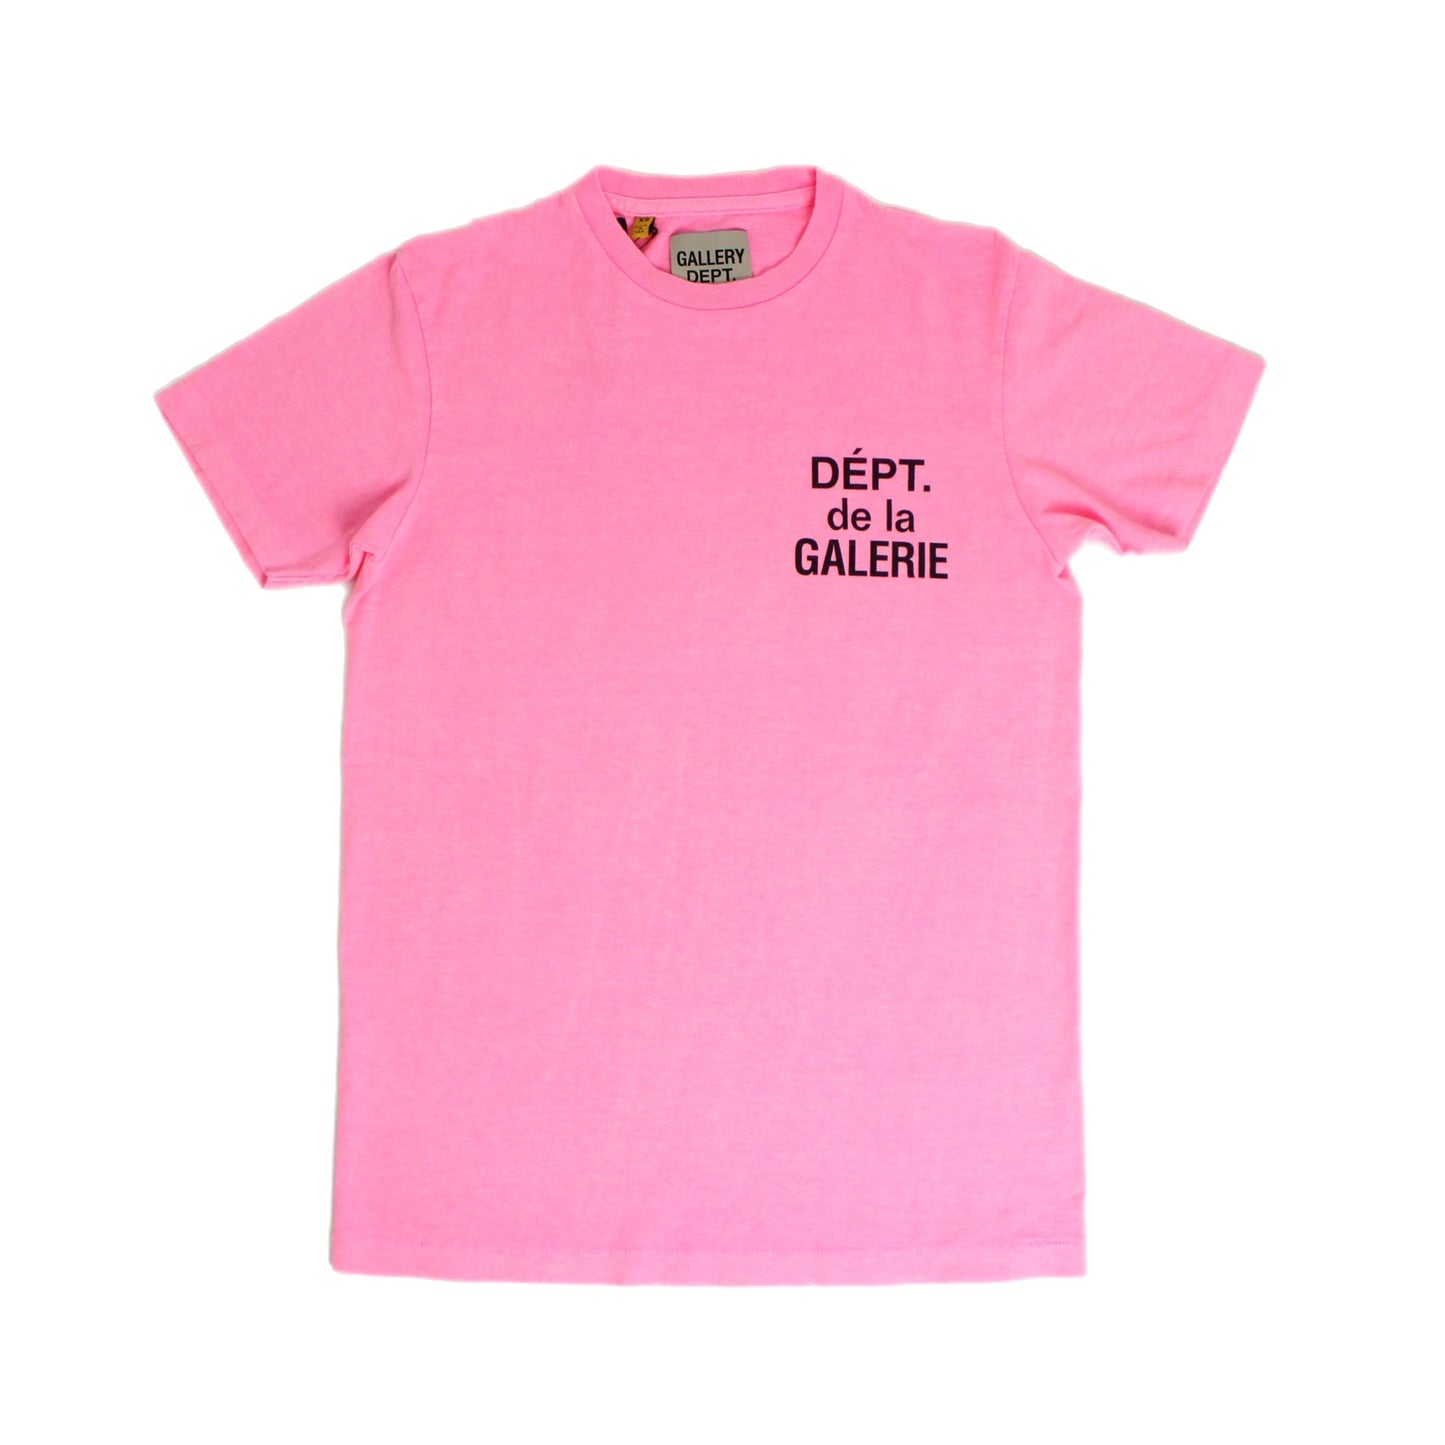 Gallery Dept. French T-Shirt Flo Pink